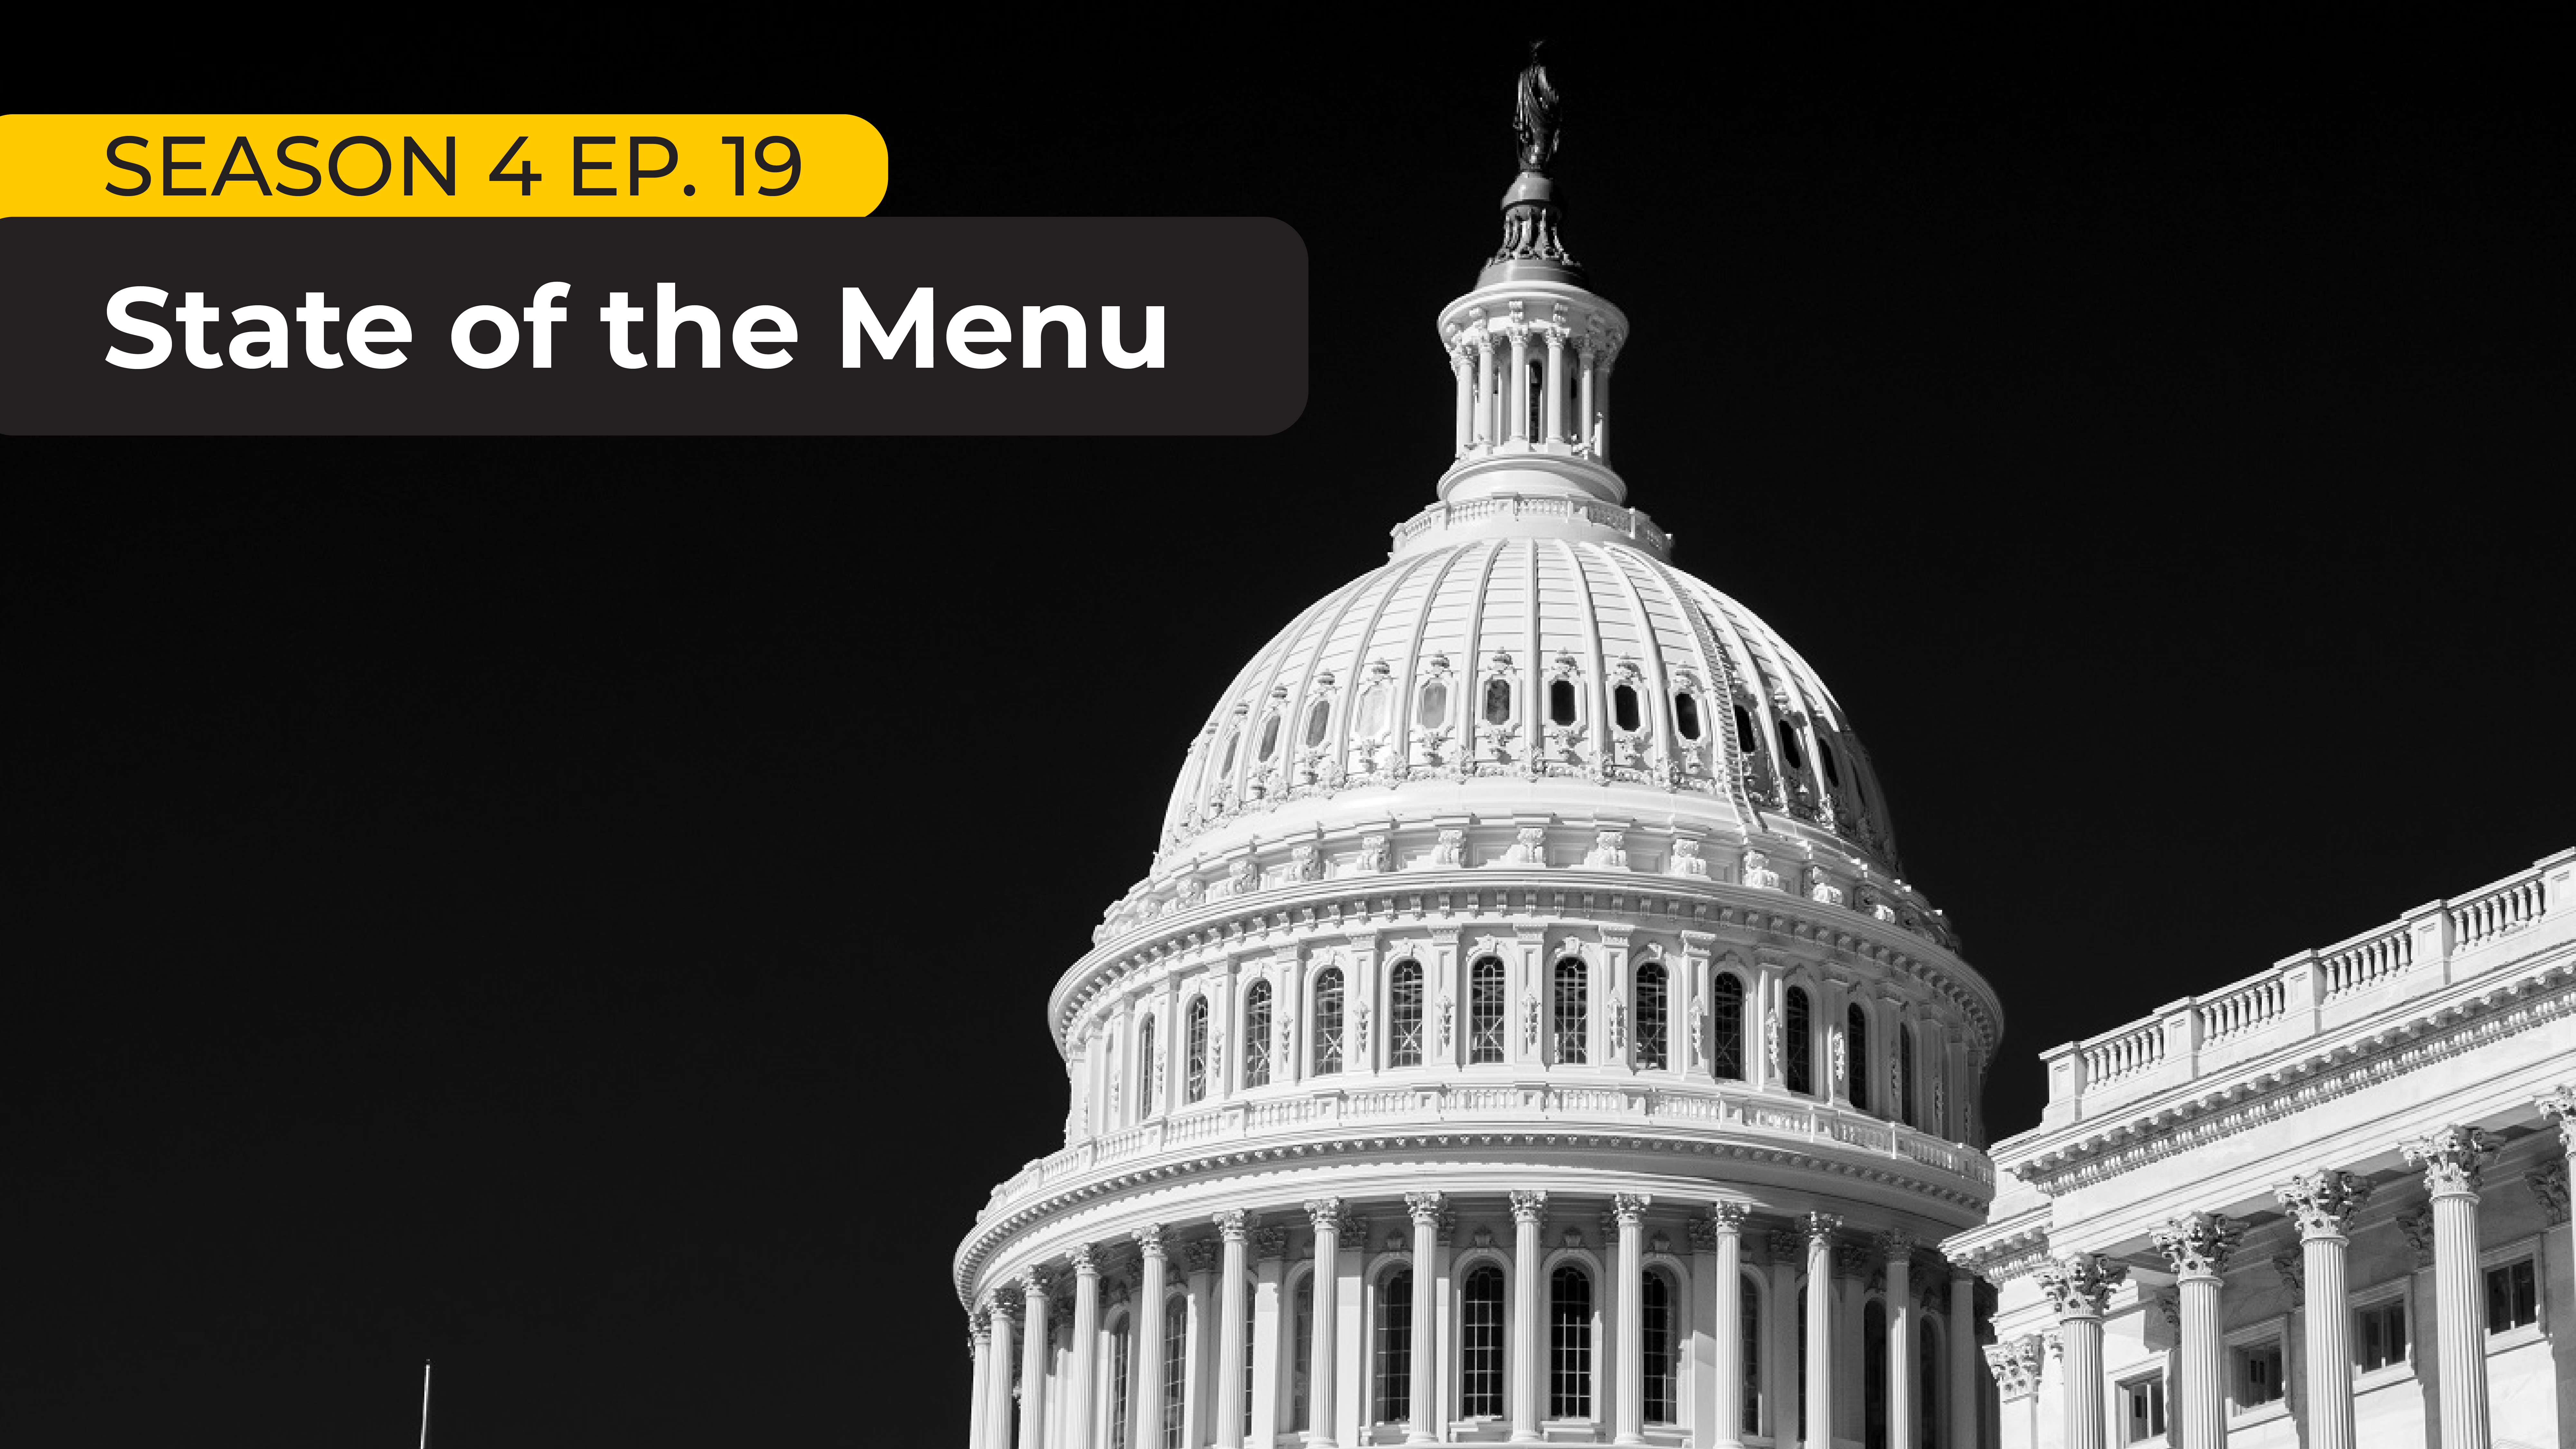 Datassential's Jack Li, Sean Jafar, and Emily Murawski share brand new insights on how menus have rebounded following Covid, where the latest food and beverage trends are headed, and what this means for the industry going forward.